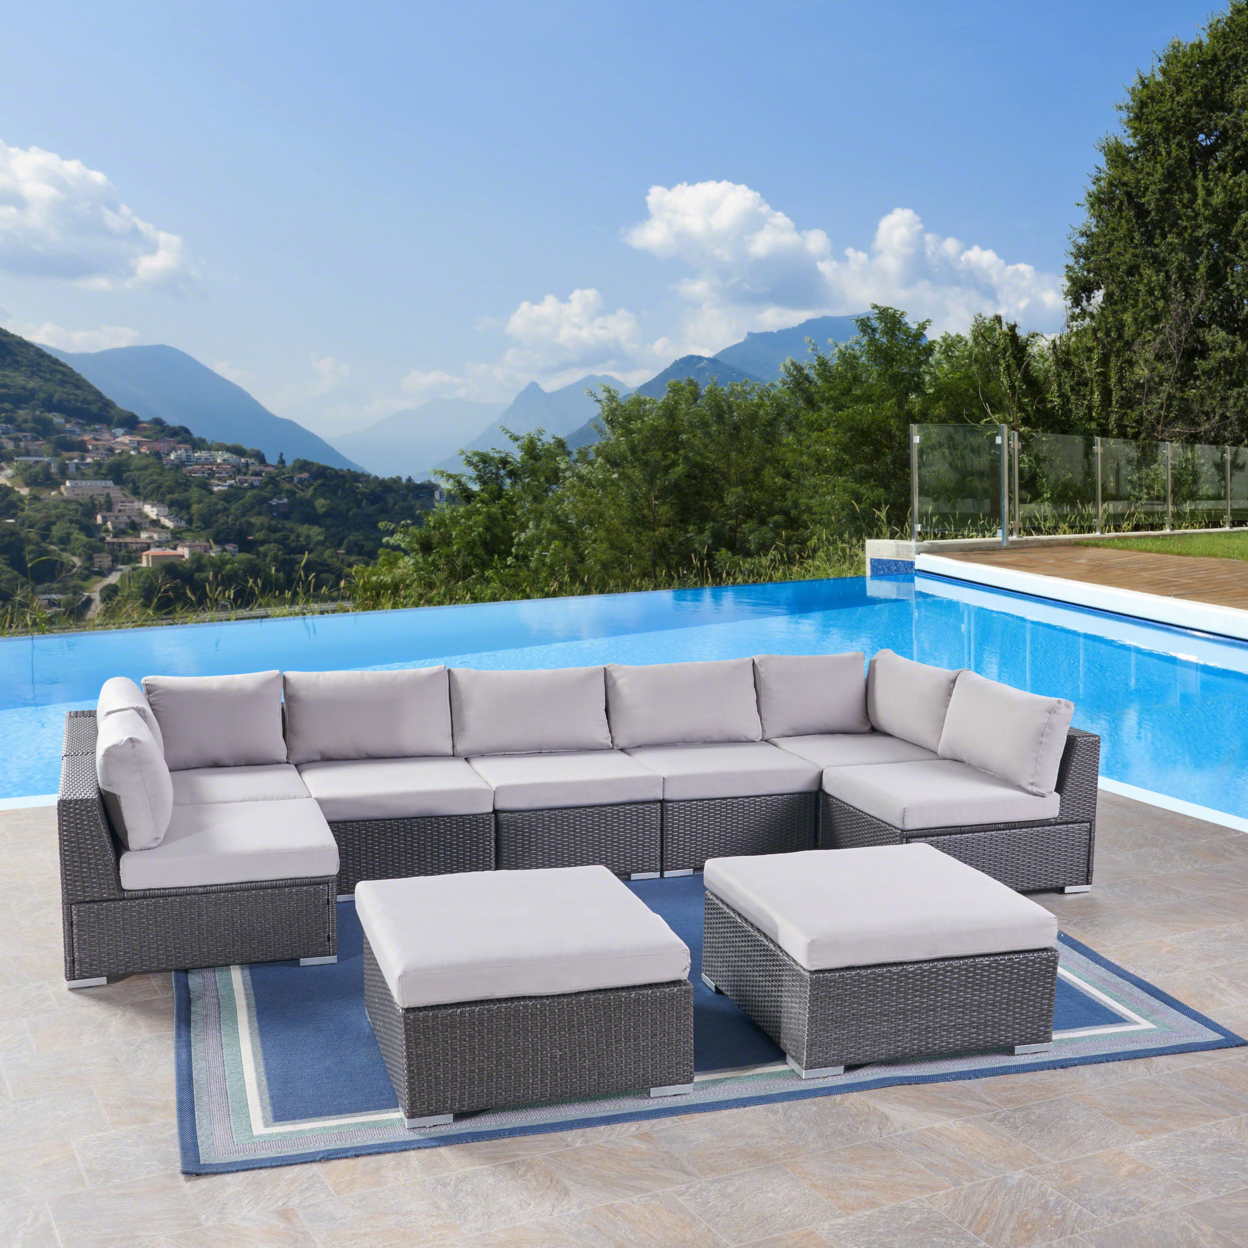 Tom Rosa Outdoor 7 Seater Wicker Sectional Sofa Set With Cushions - Brown Wicker